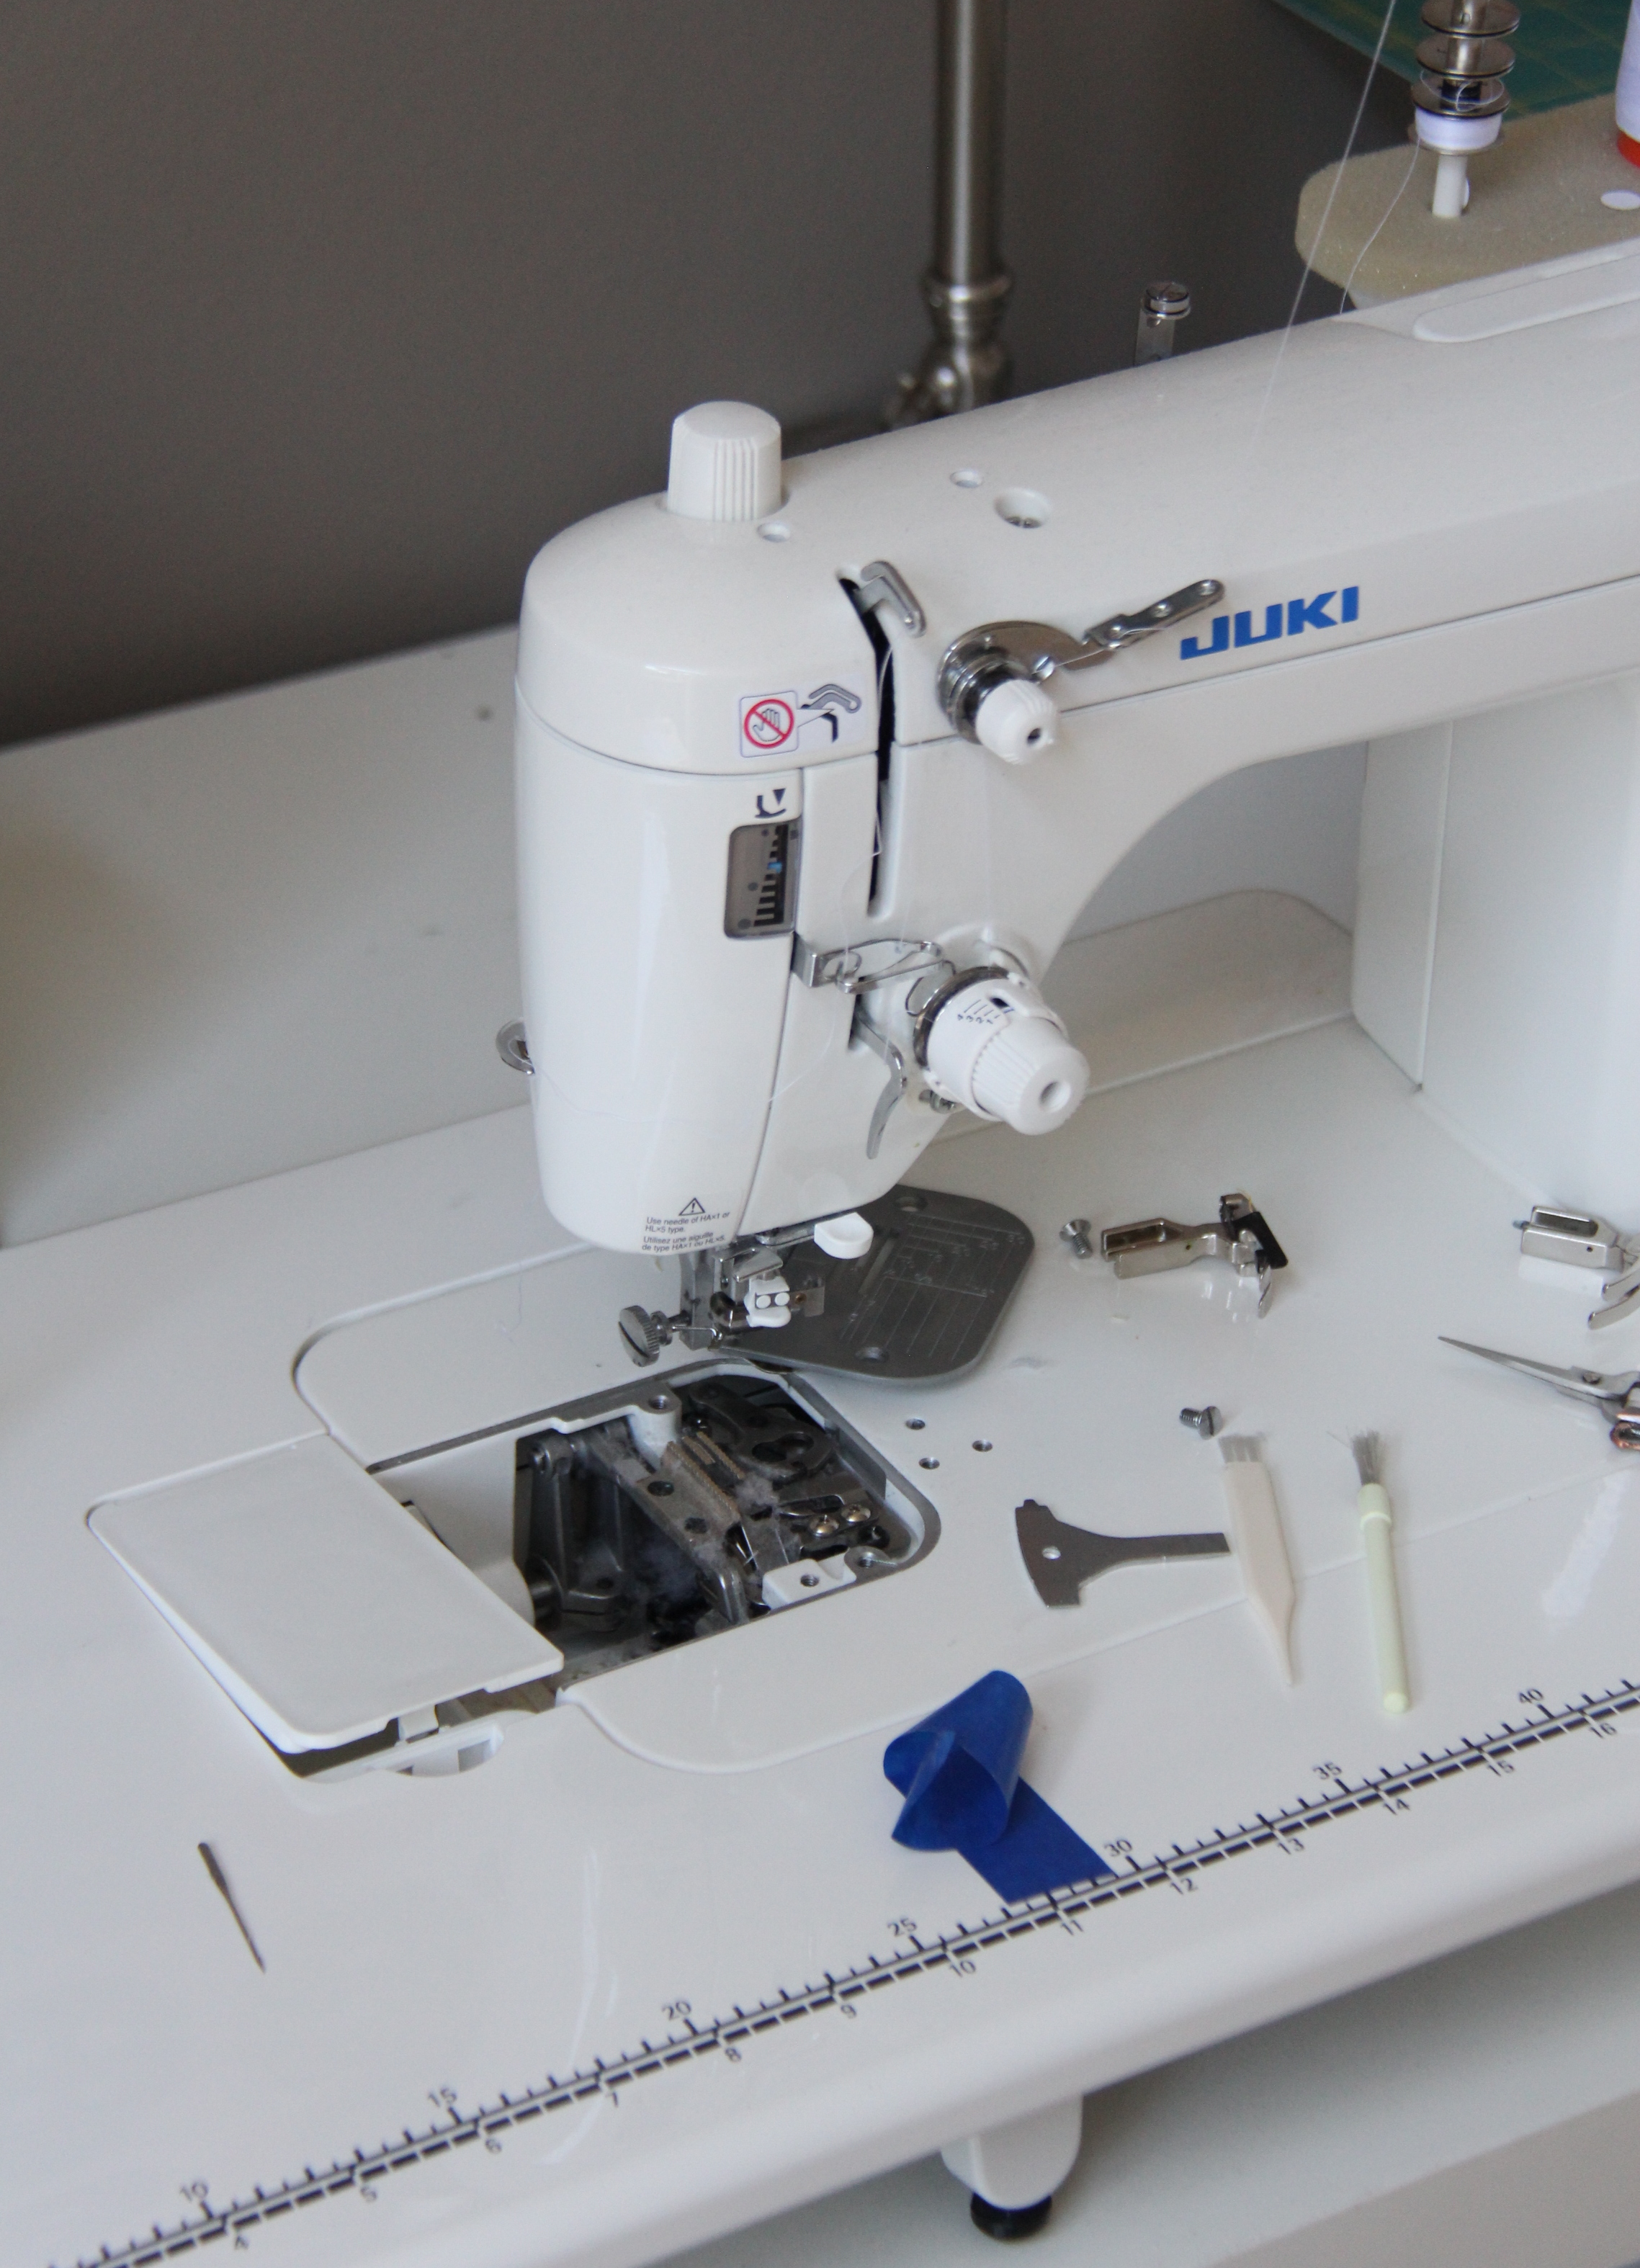 Cleaning a sewing machine